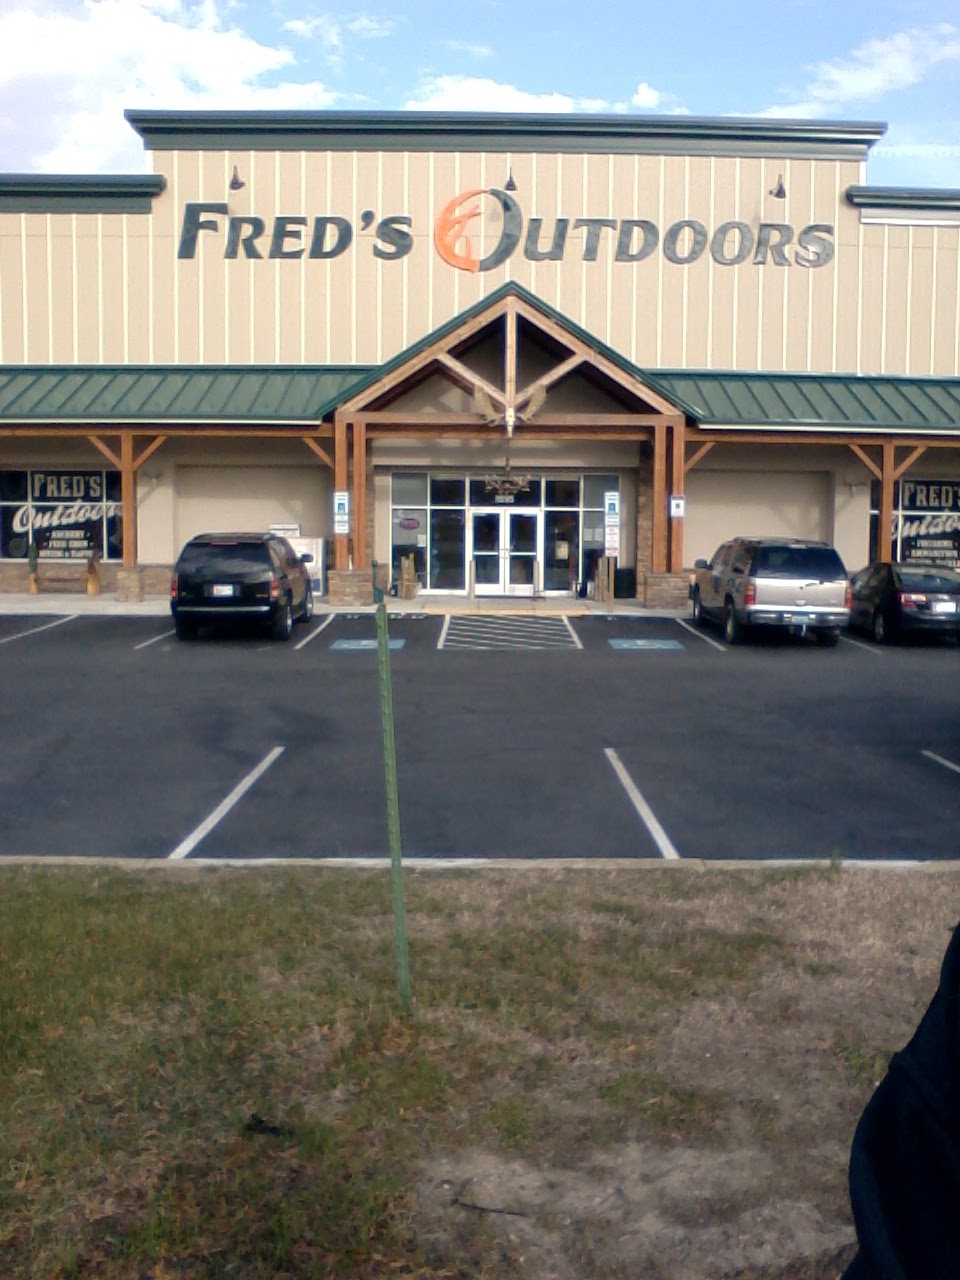 Fred's Outdoors